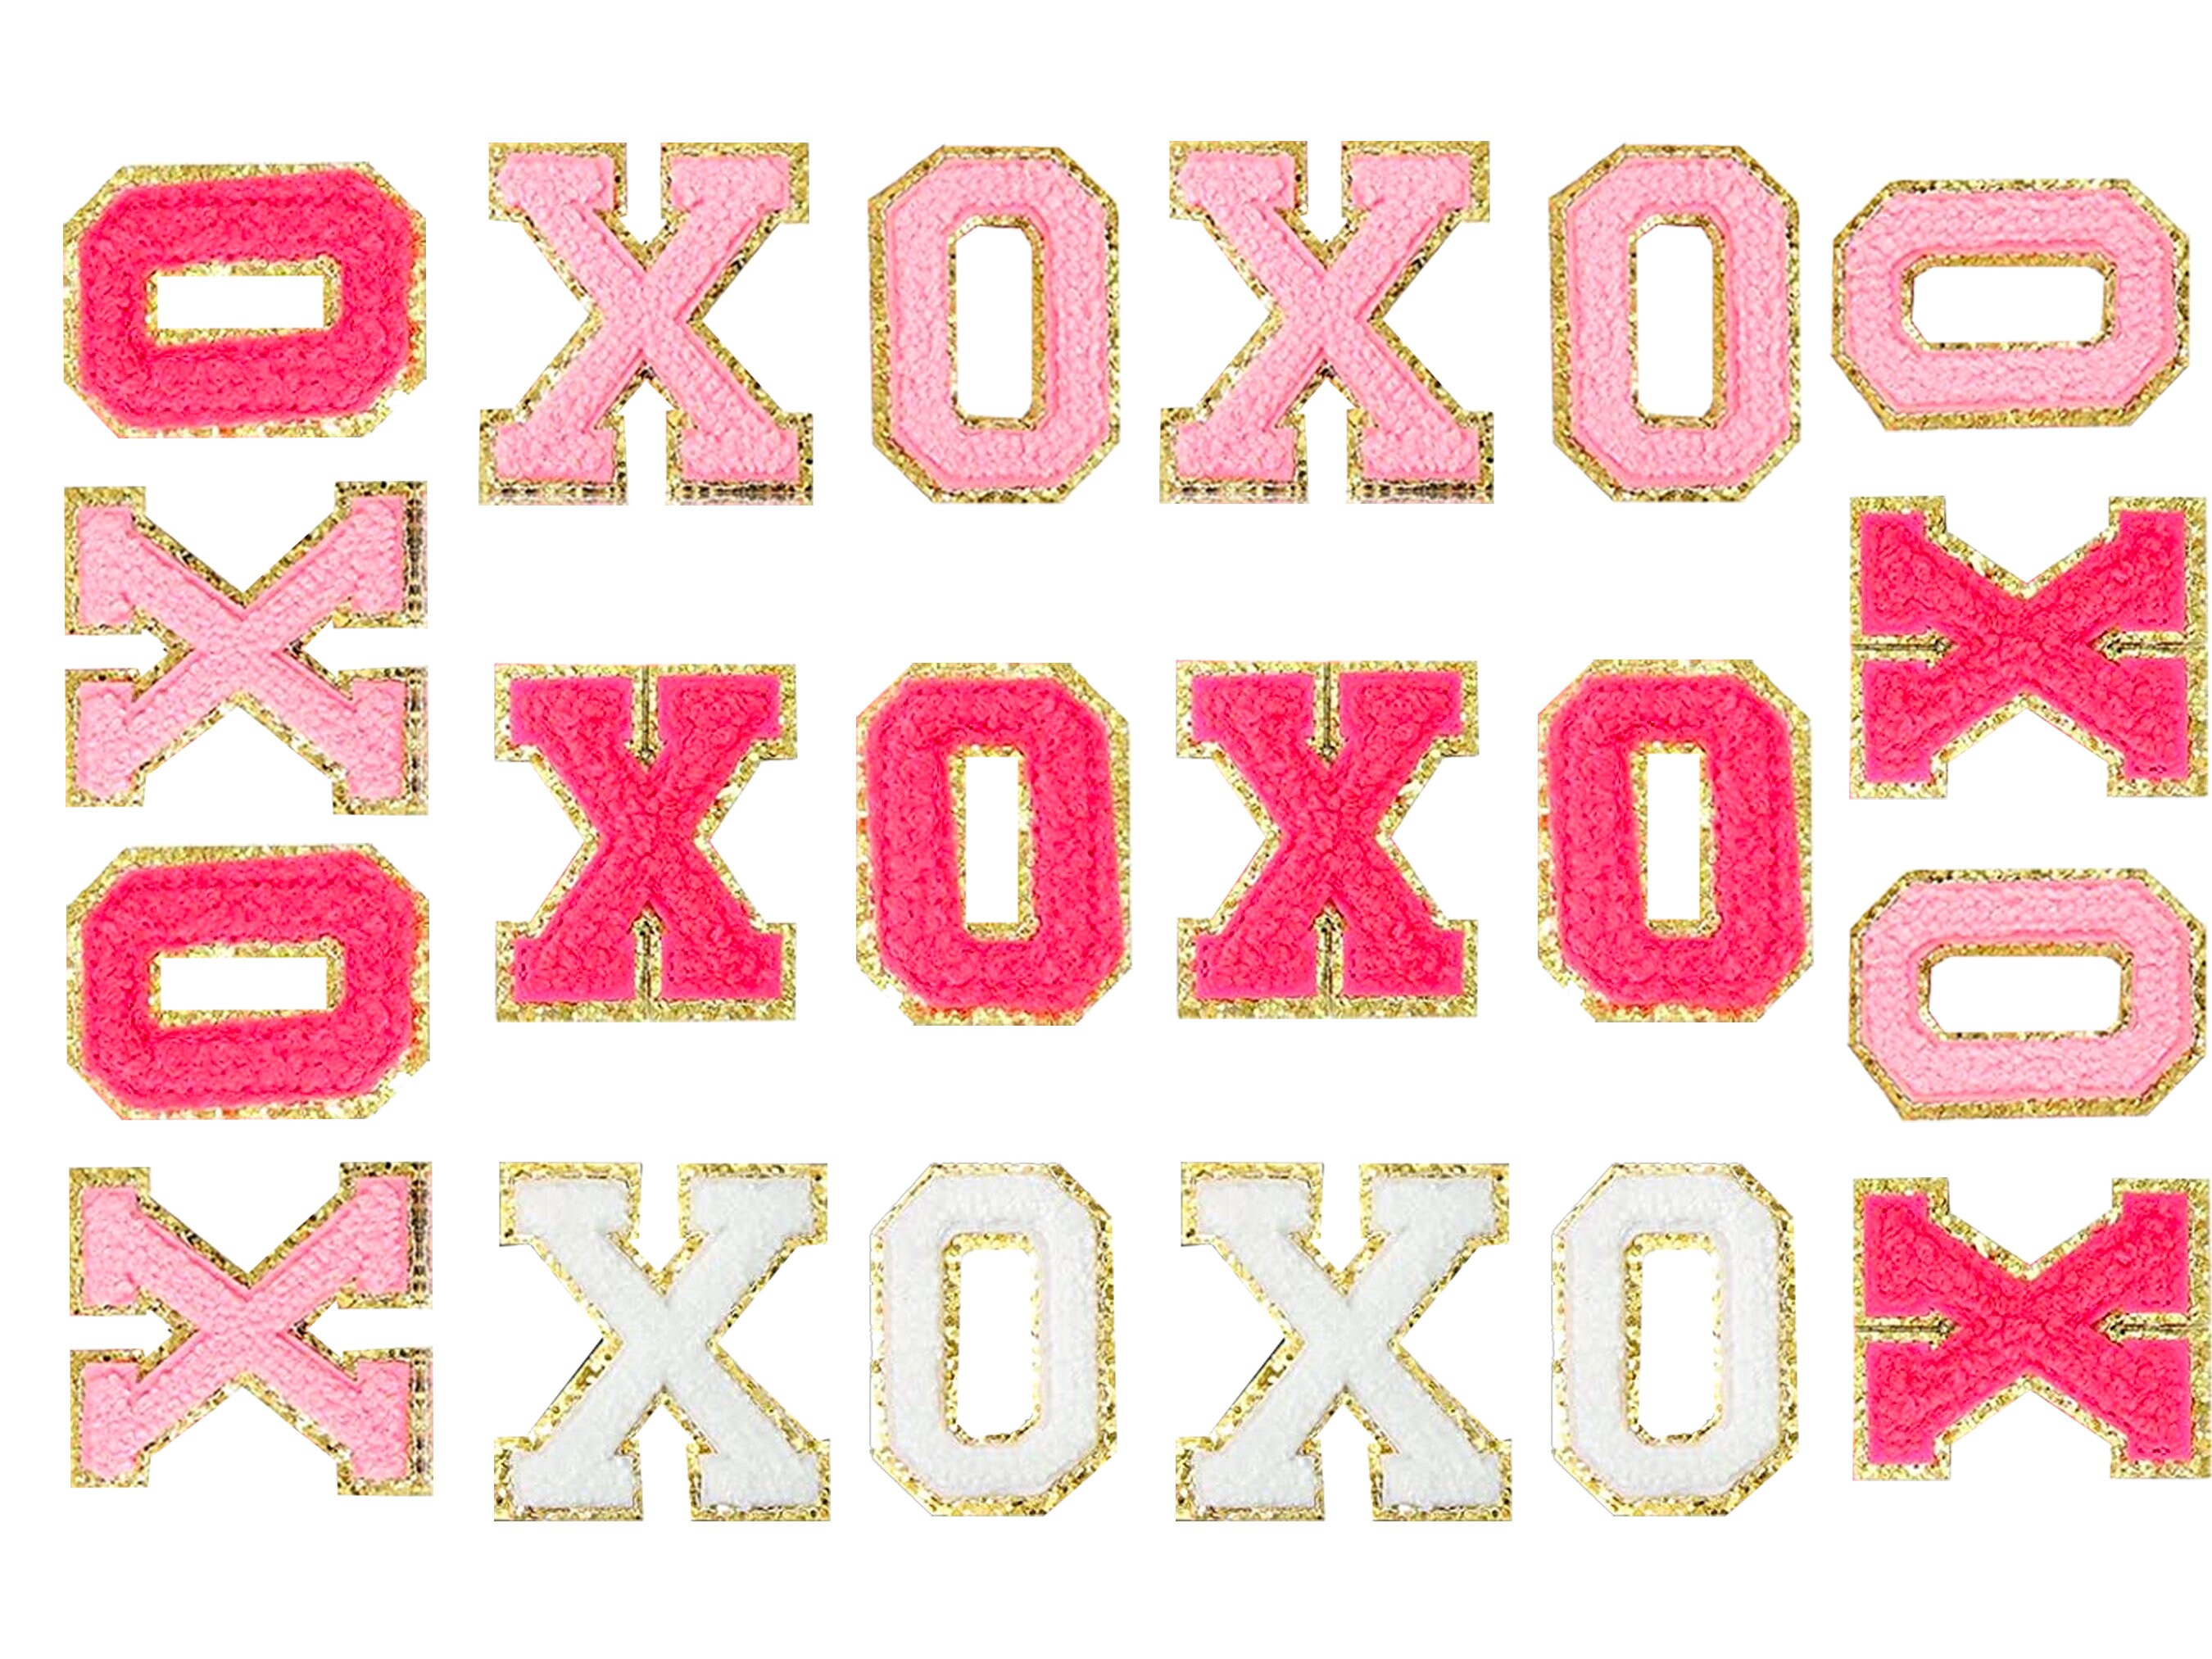 Pippa Lane Self Adhesive Letter Patches for Clothing (26pc Sew, Glue or Stick on Letters). 2.5 inch Decals, Cute Stick on Patches, Varsity Chenille